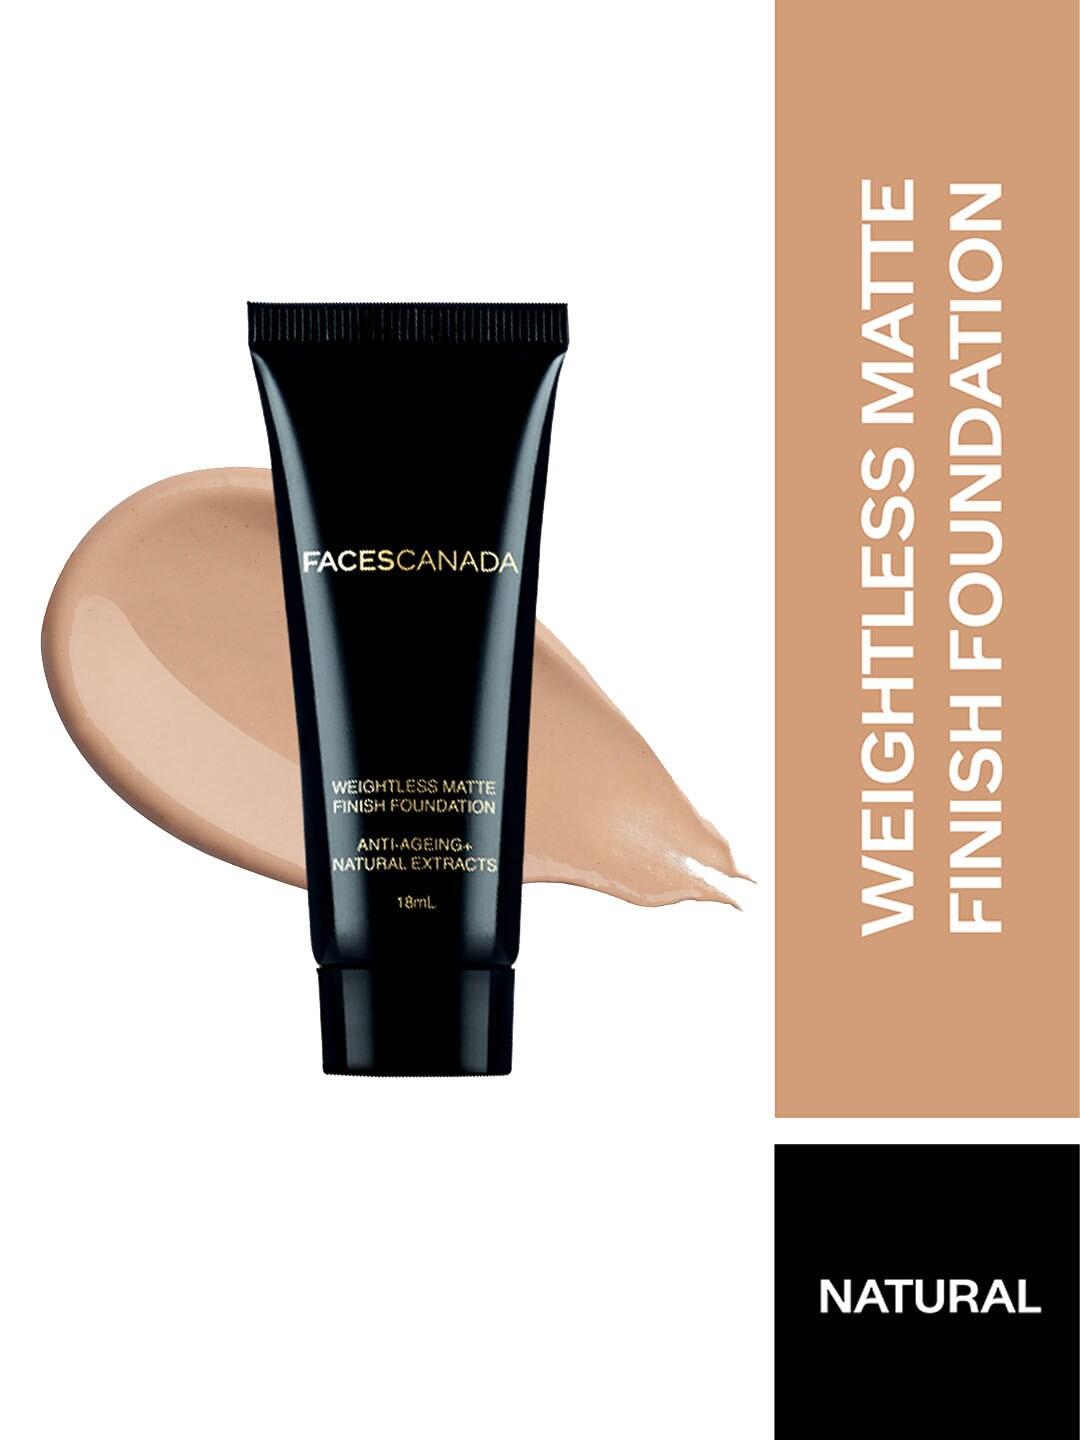 faces-canada-weightless-matte-foundation-with-grape-extracts-&-shea-butter-18ml---natural-02